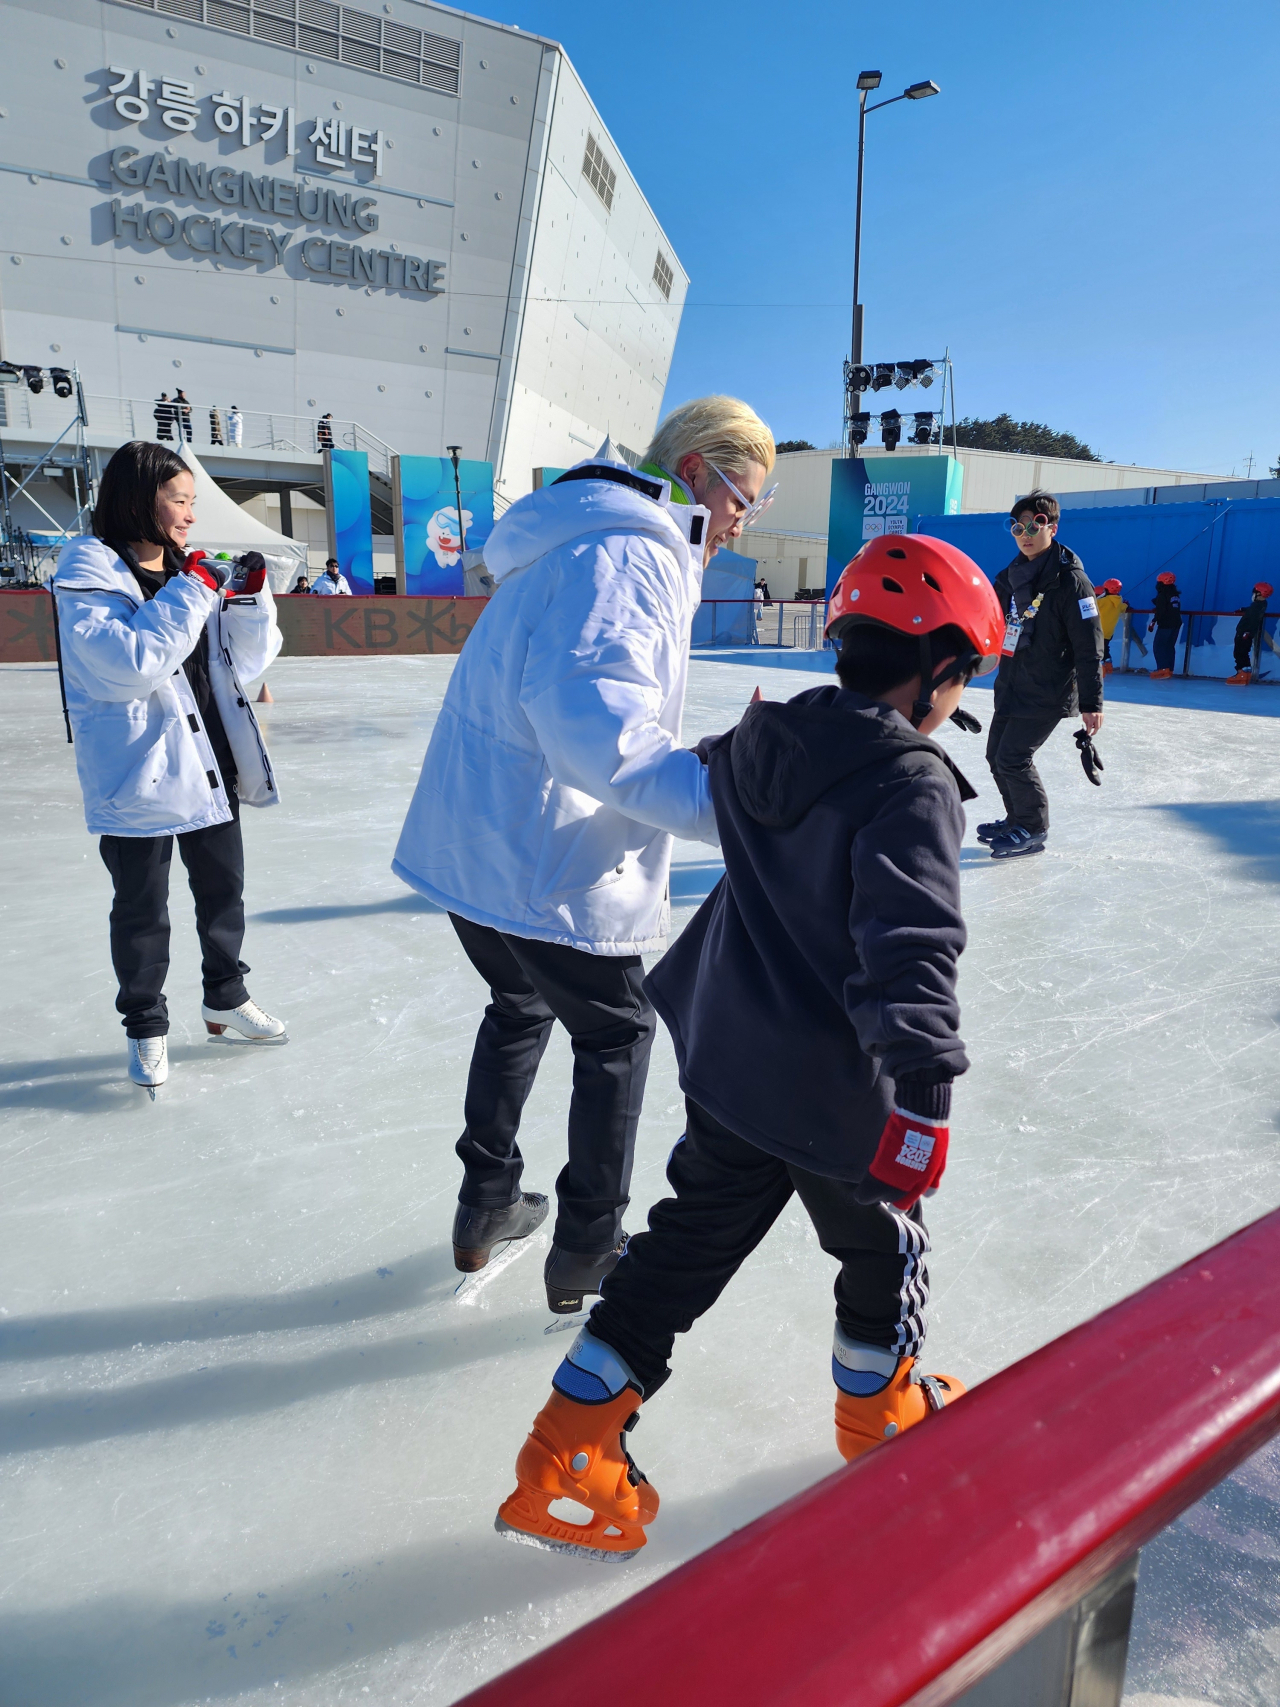 Alex Shibutani skates together with a child during a mentoring program at Gangneung Hockey Centre in Gangneung, Gangwon Province. (PyeongChang 2018 Legacy Foundation)